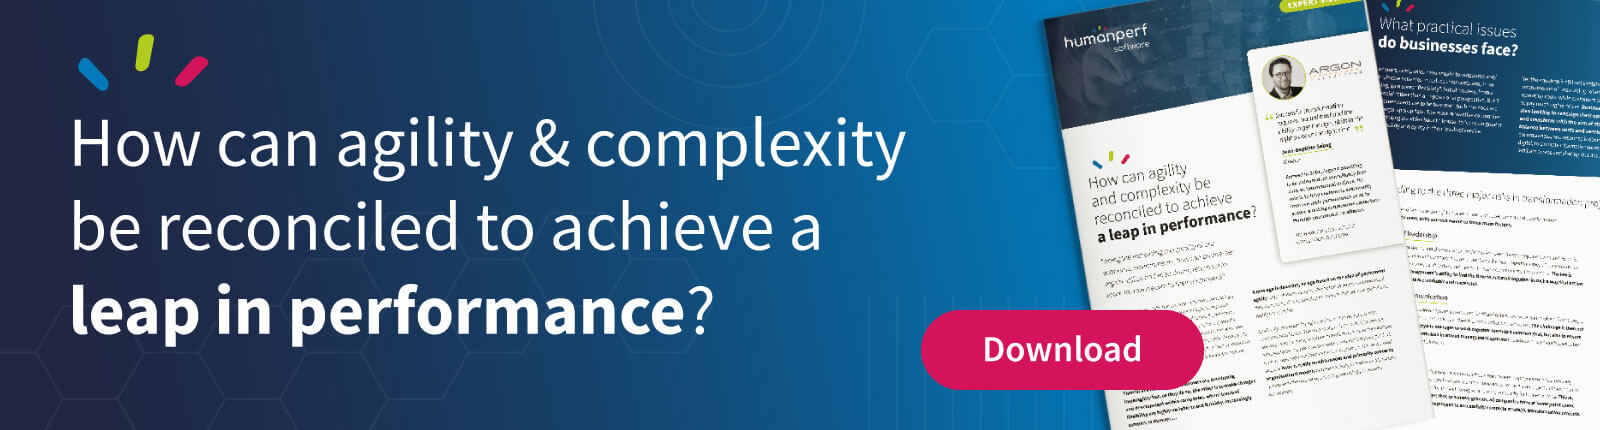 How can agility and complexity be reconciled to achieve a leap in performance?